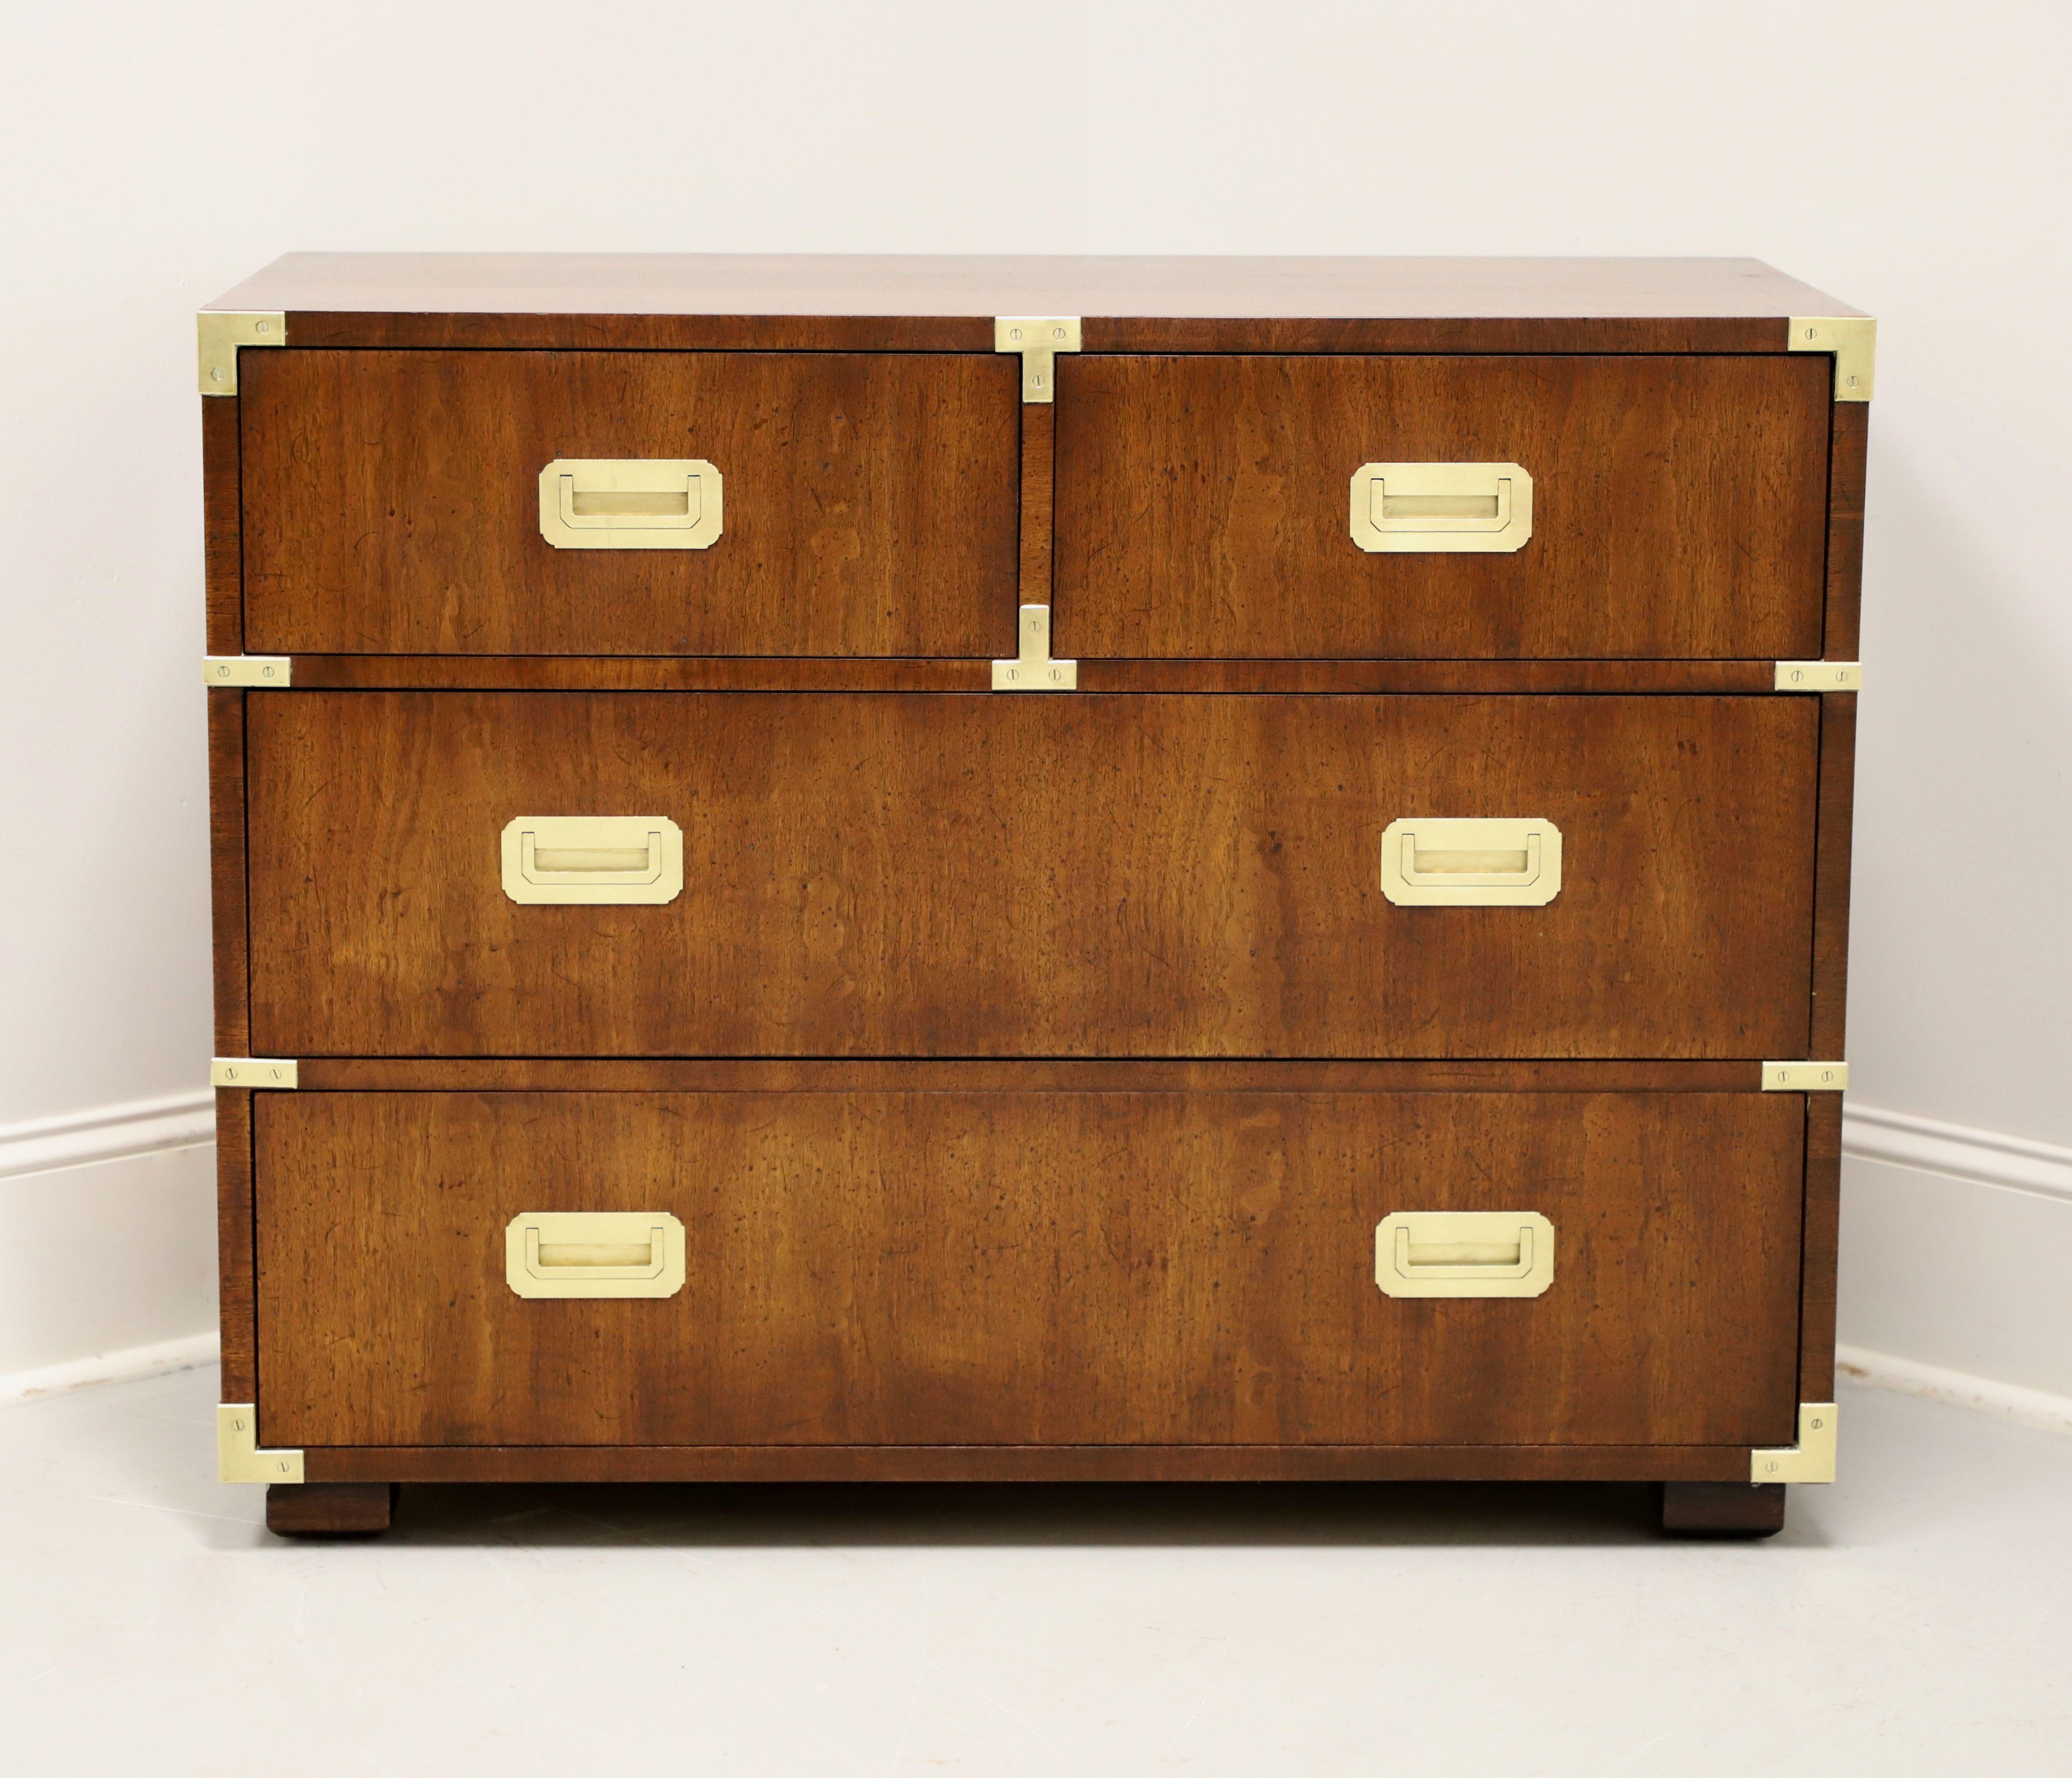 A campaign style bachelor chest by Henredon. Walnut with a slightly distressed finish, brass hardware & accents, smooth edge to top, and block feet. Features two smaller over four larger drawers of dovetail construction with the top right drawer